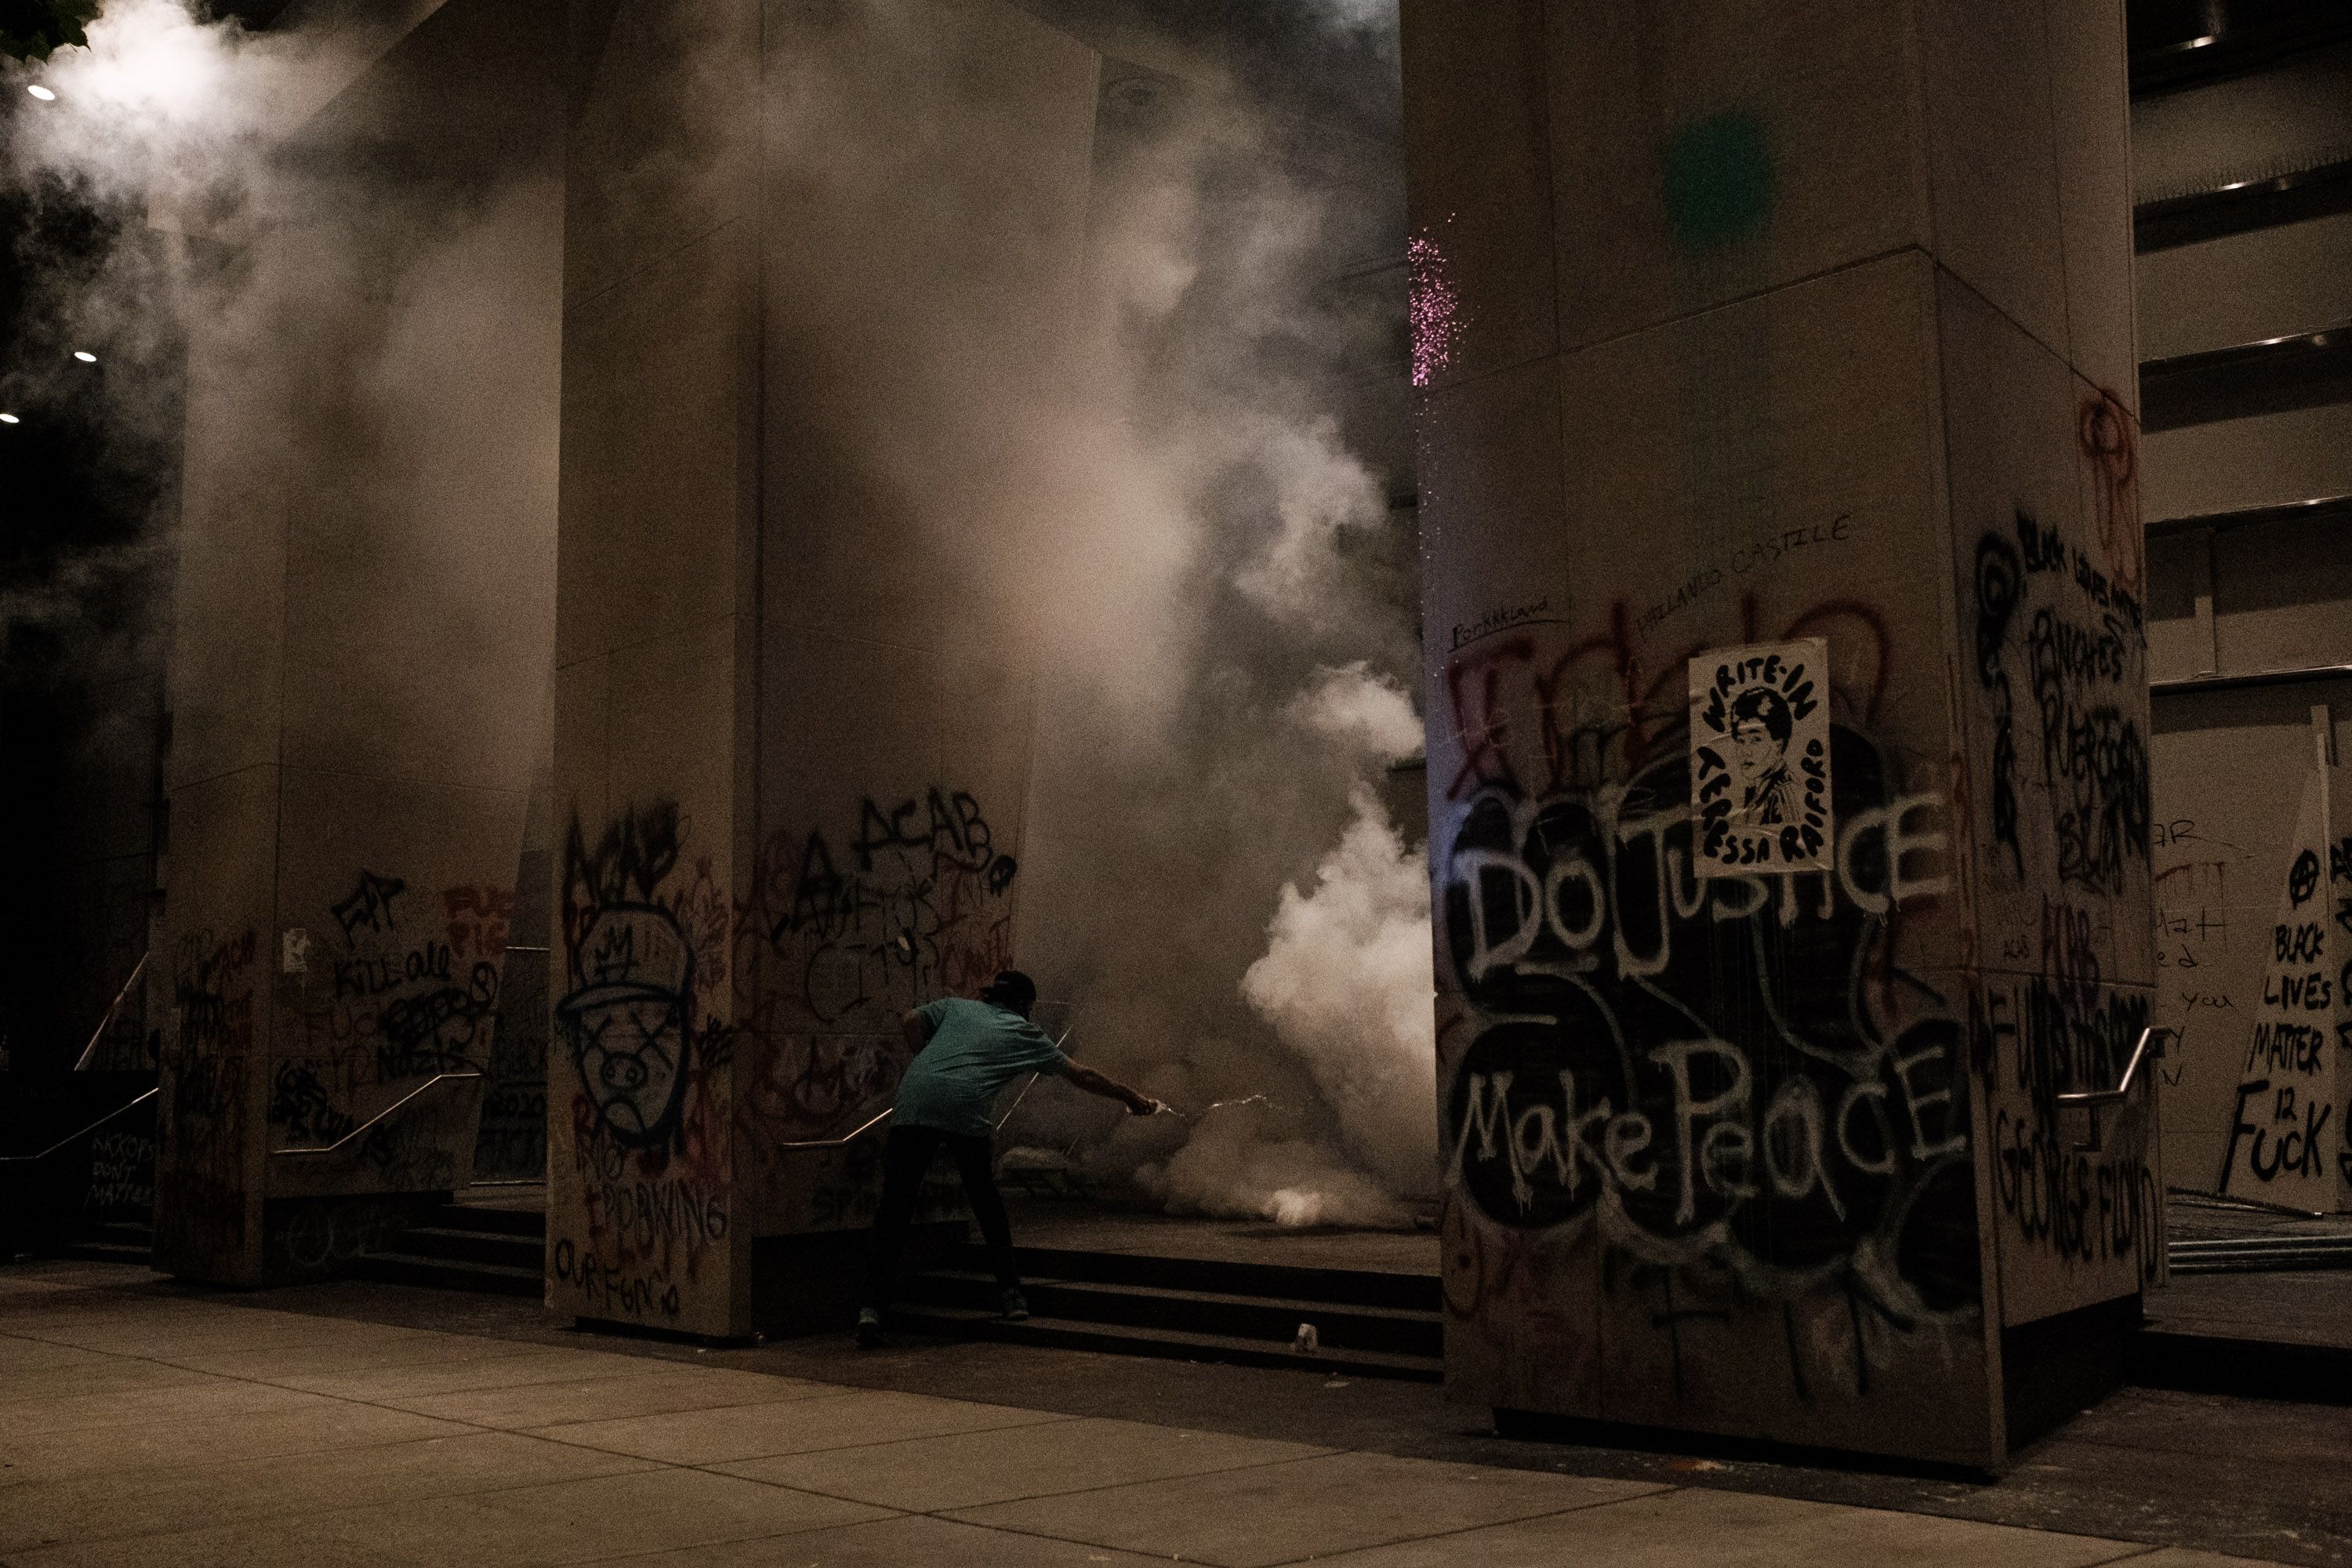 Tear gas being deployed on the steps of the U.S. District Court building. Photo: Mason Trinca/Getty Images